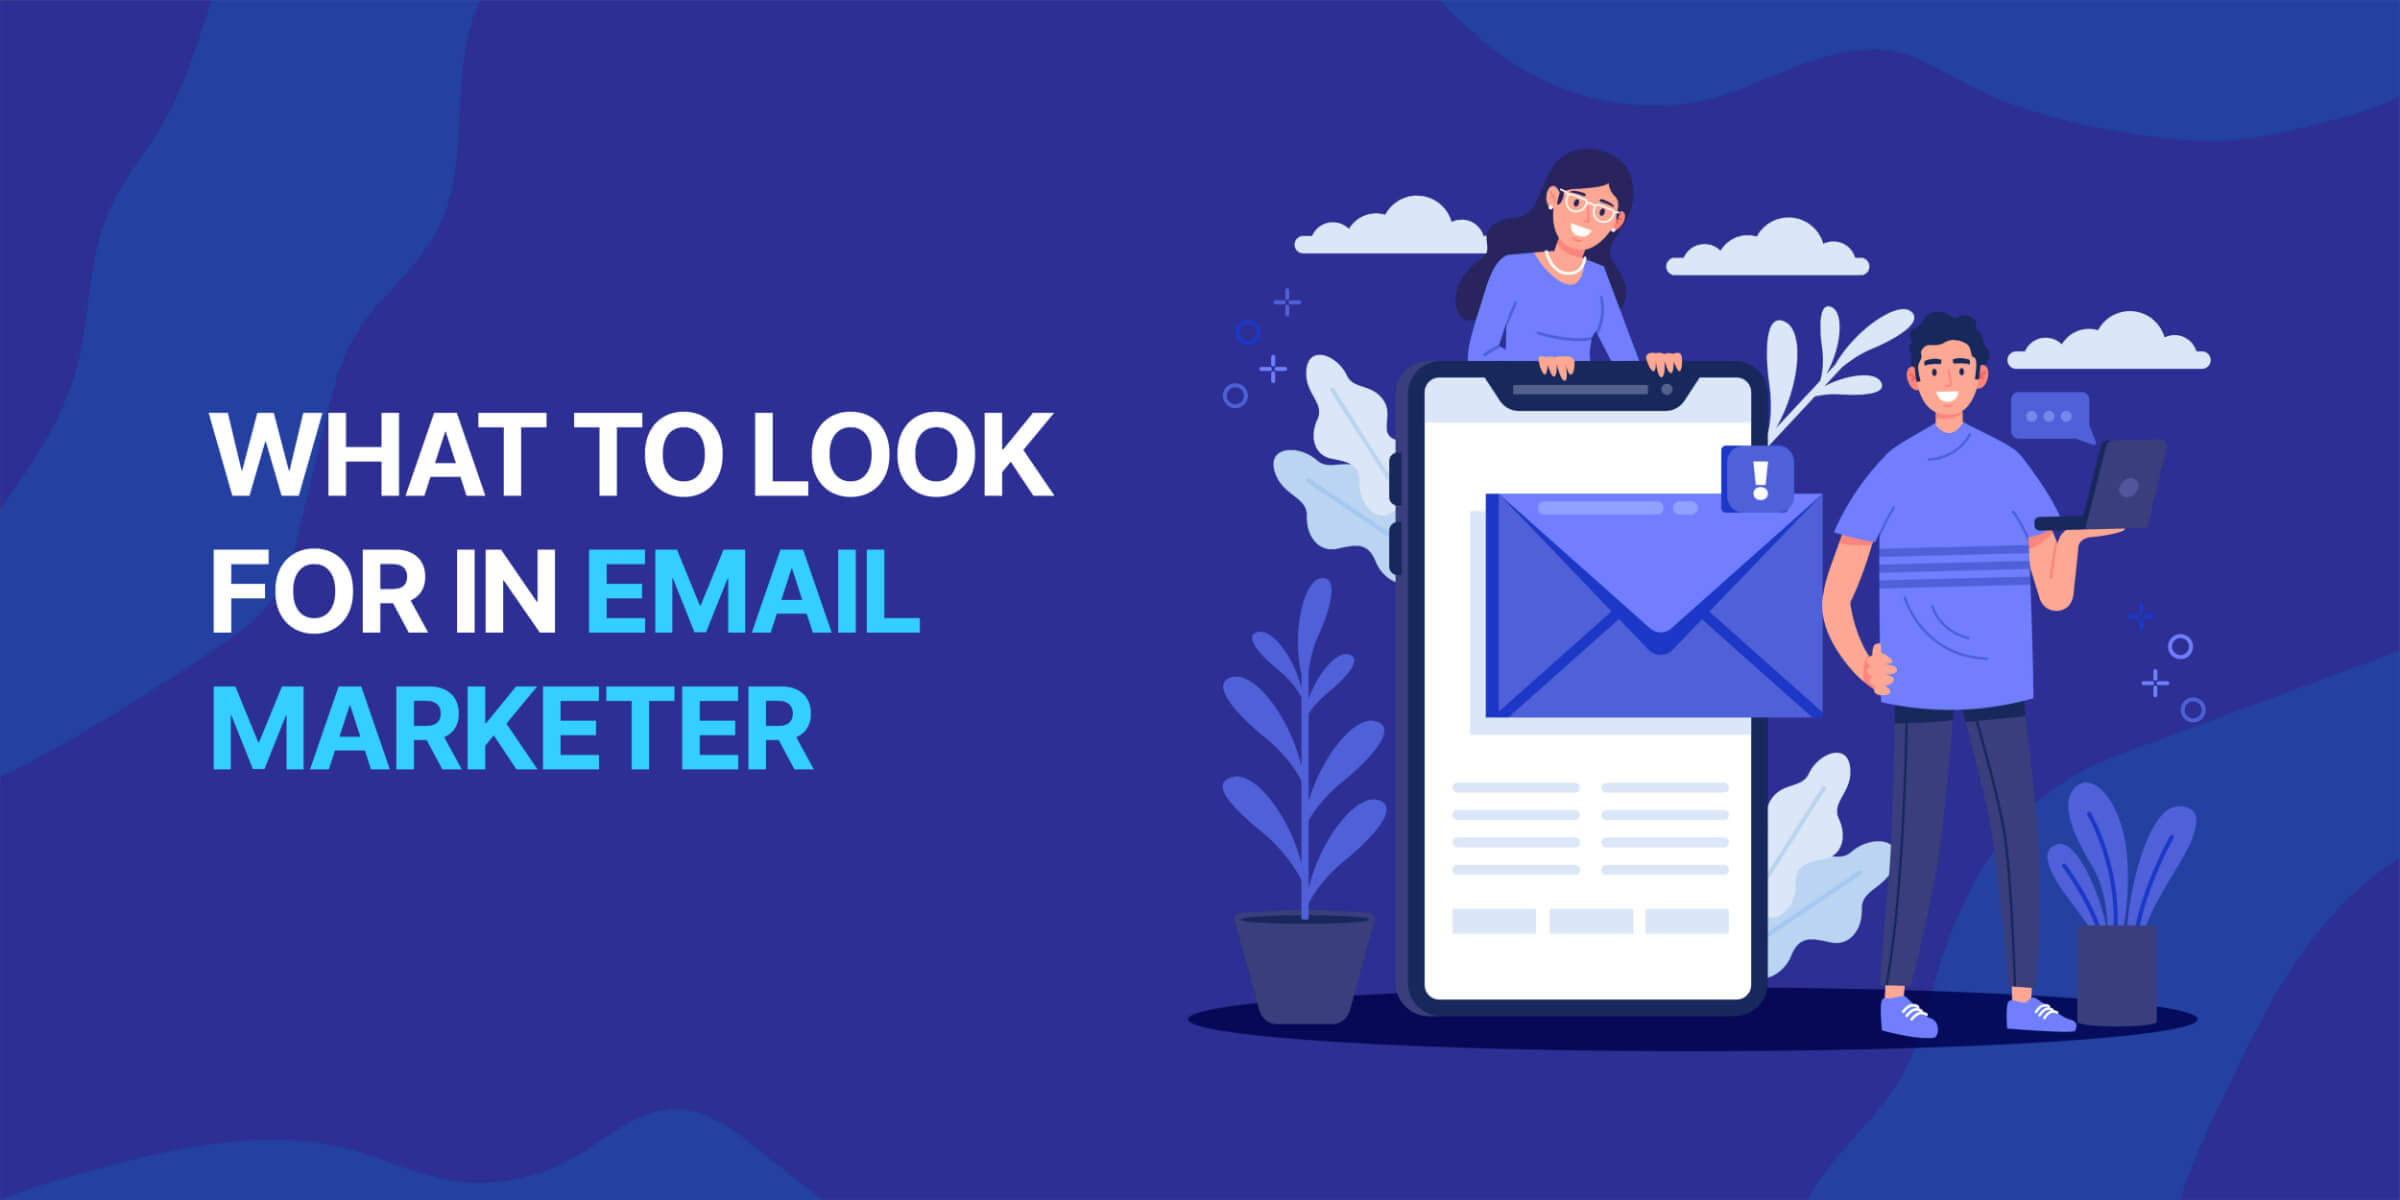 What to Look for in Email Marketer